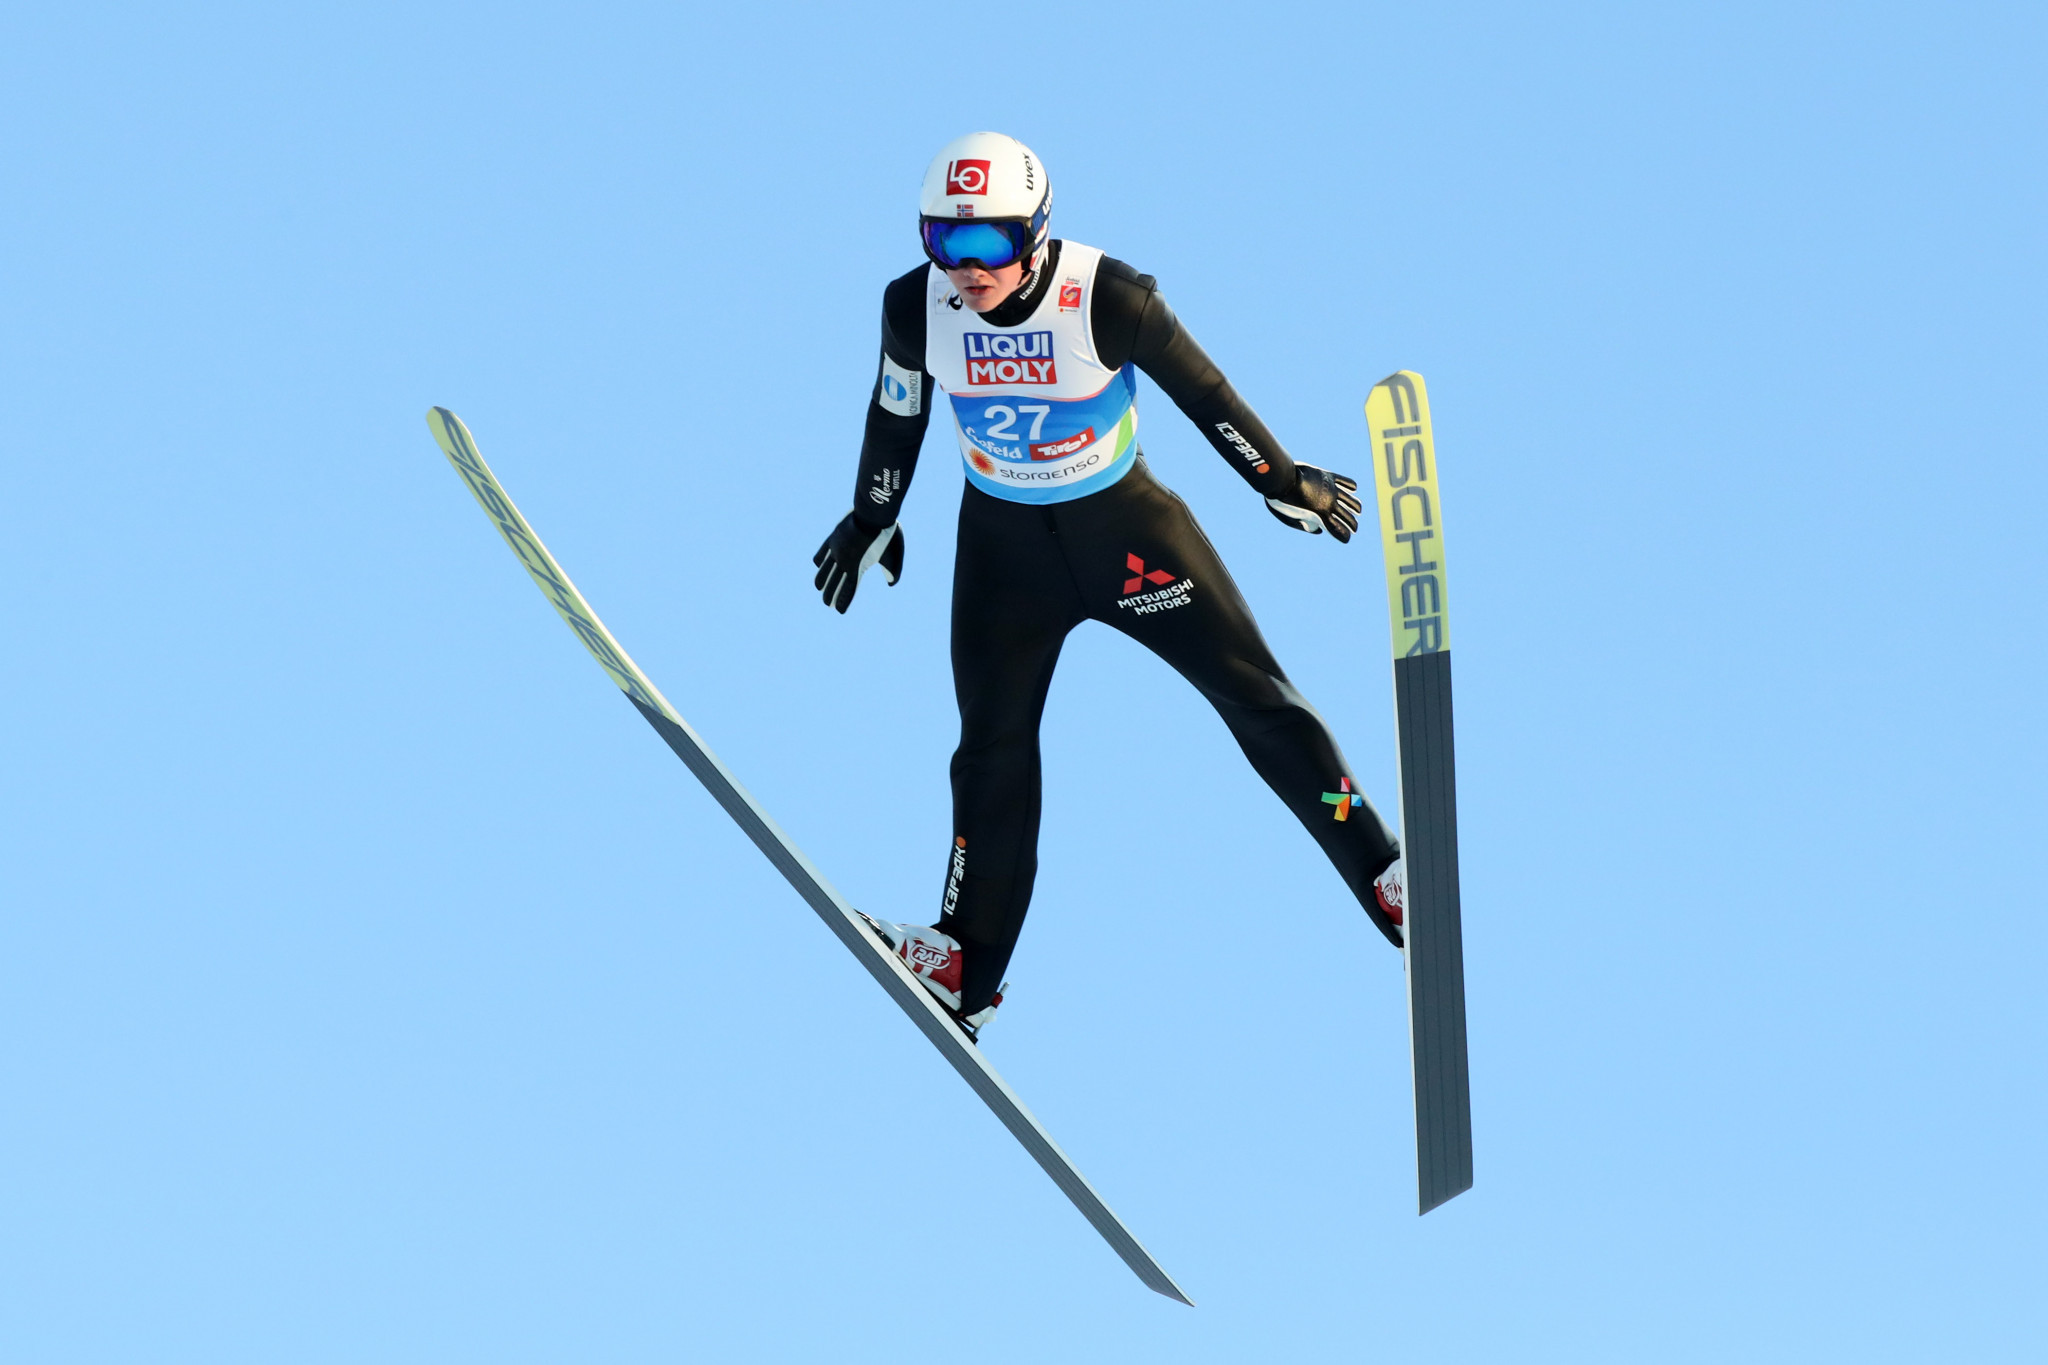 Thomas Aasen Markeng is set to make his Ski Jumping World Cup return in Zakopane ©Getty Images 